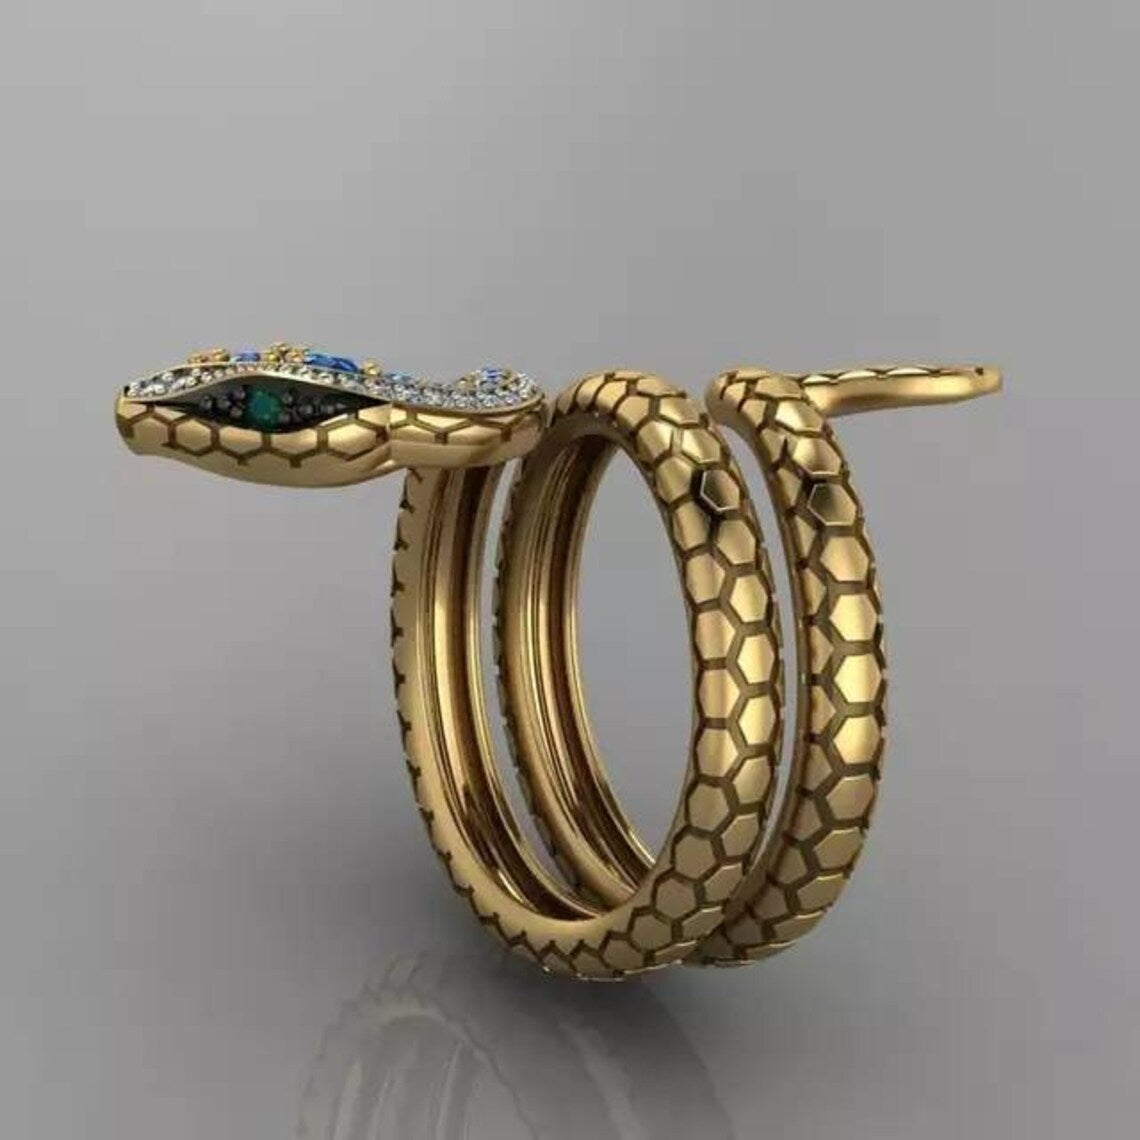 Vintage Coiled Snake Ethnic Open Ouroboros Gold Ring